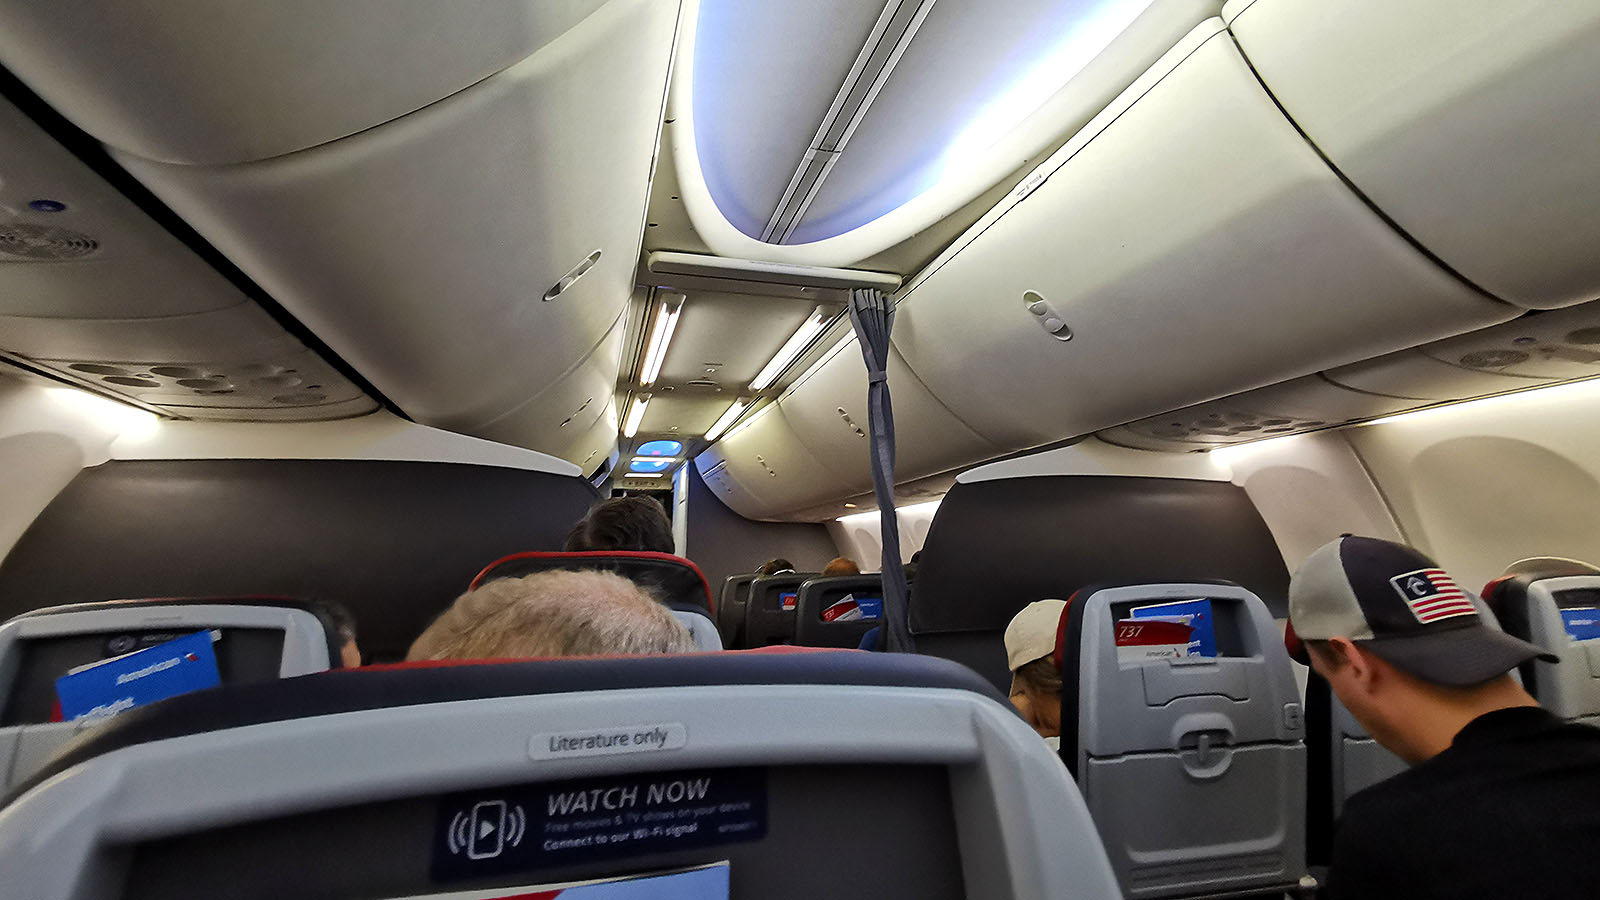 Mood lights in American Airlines Boeing 737 Economy